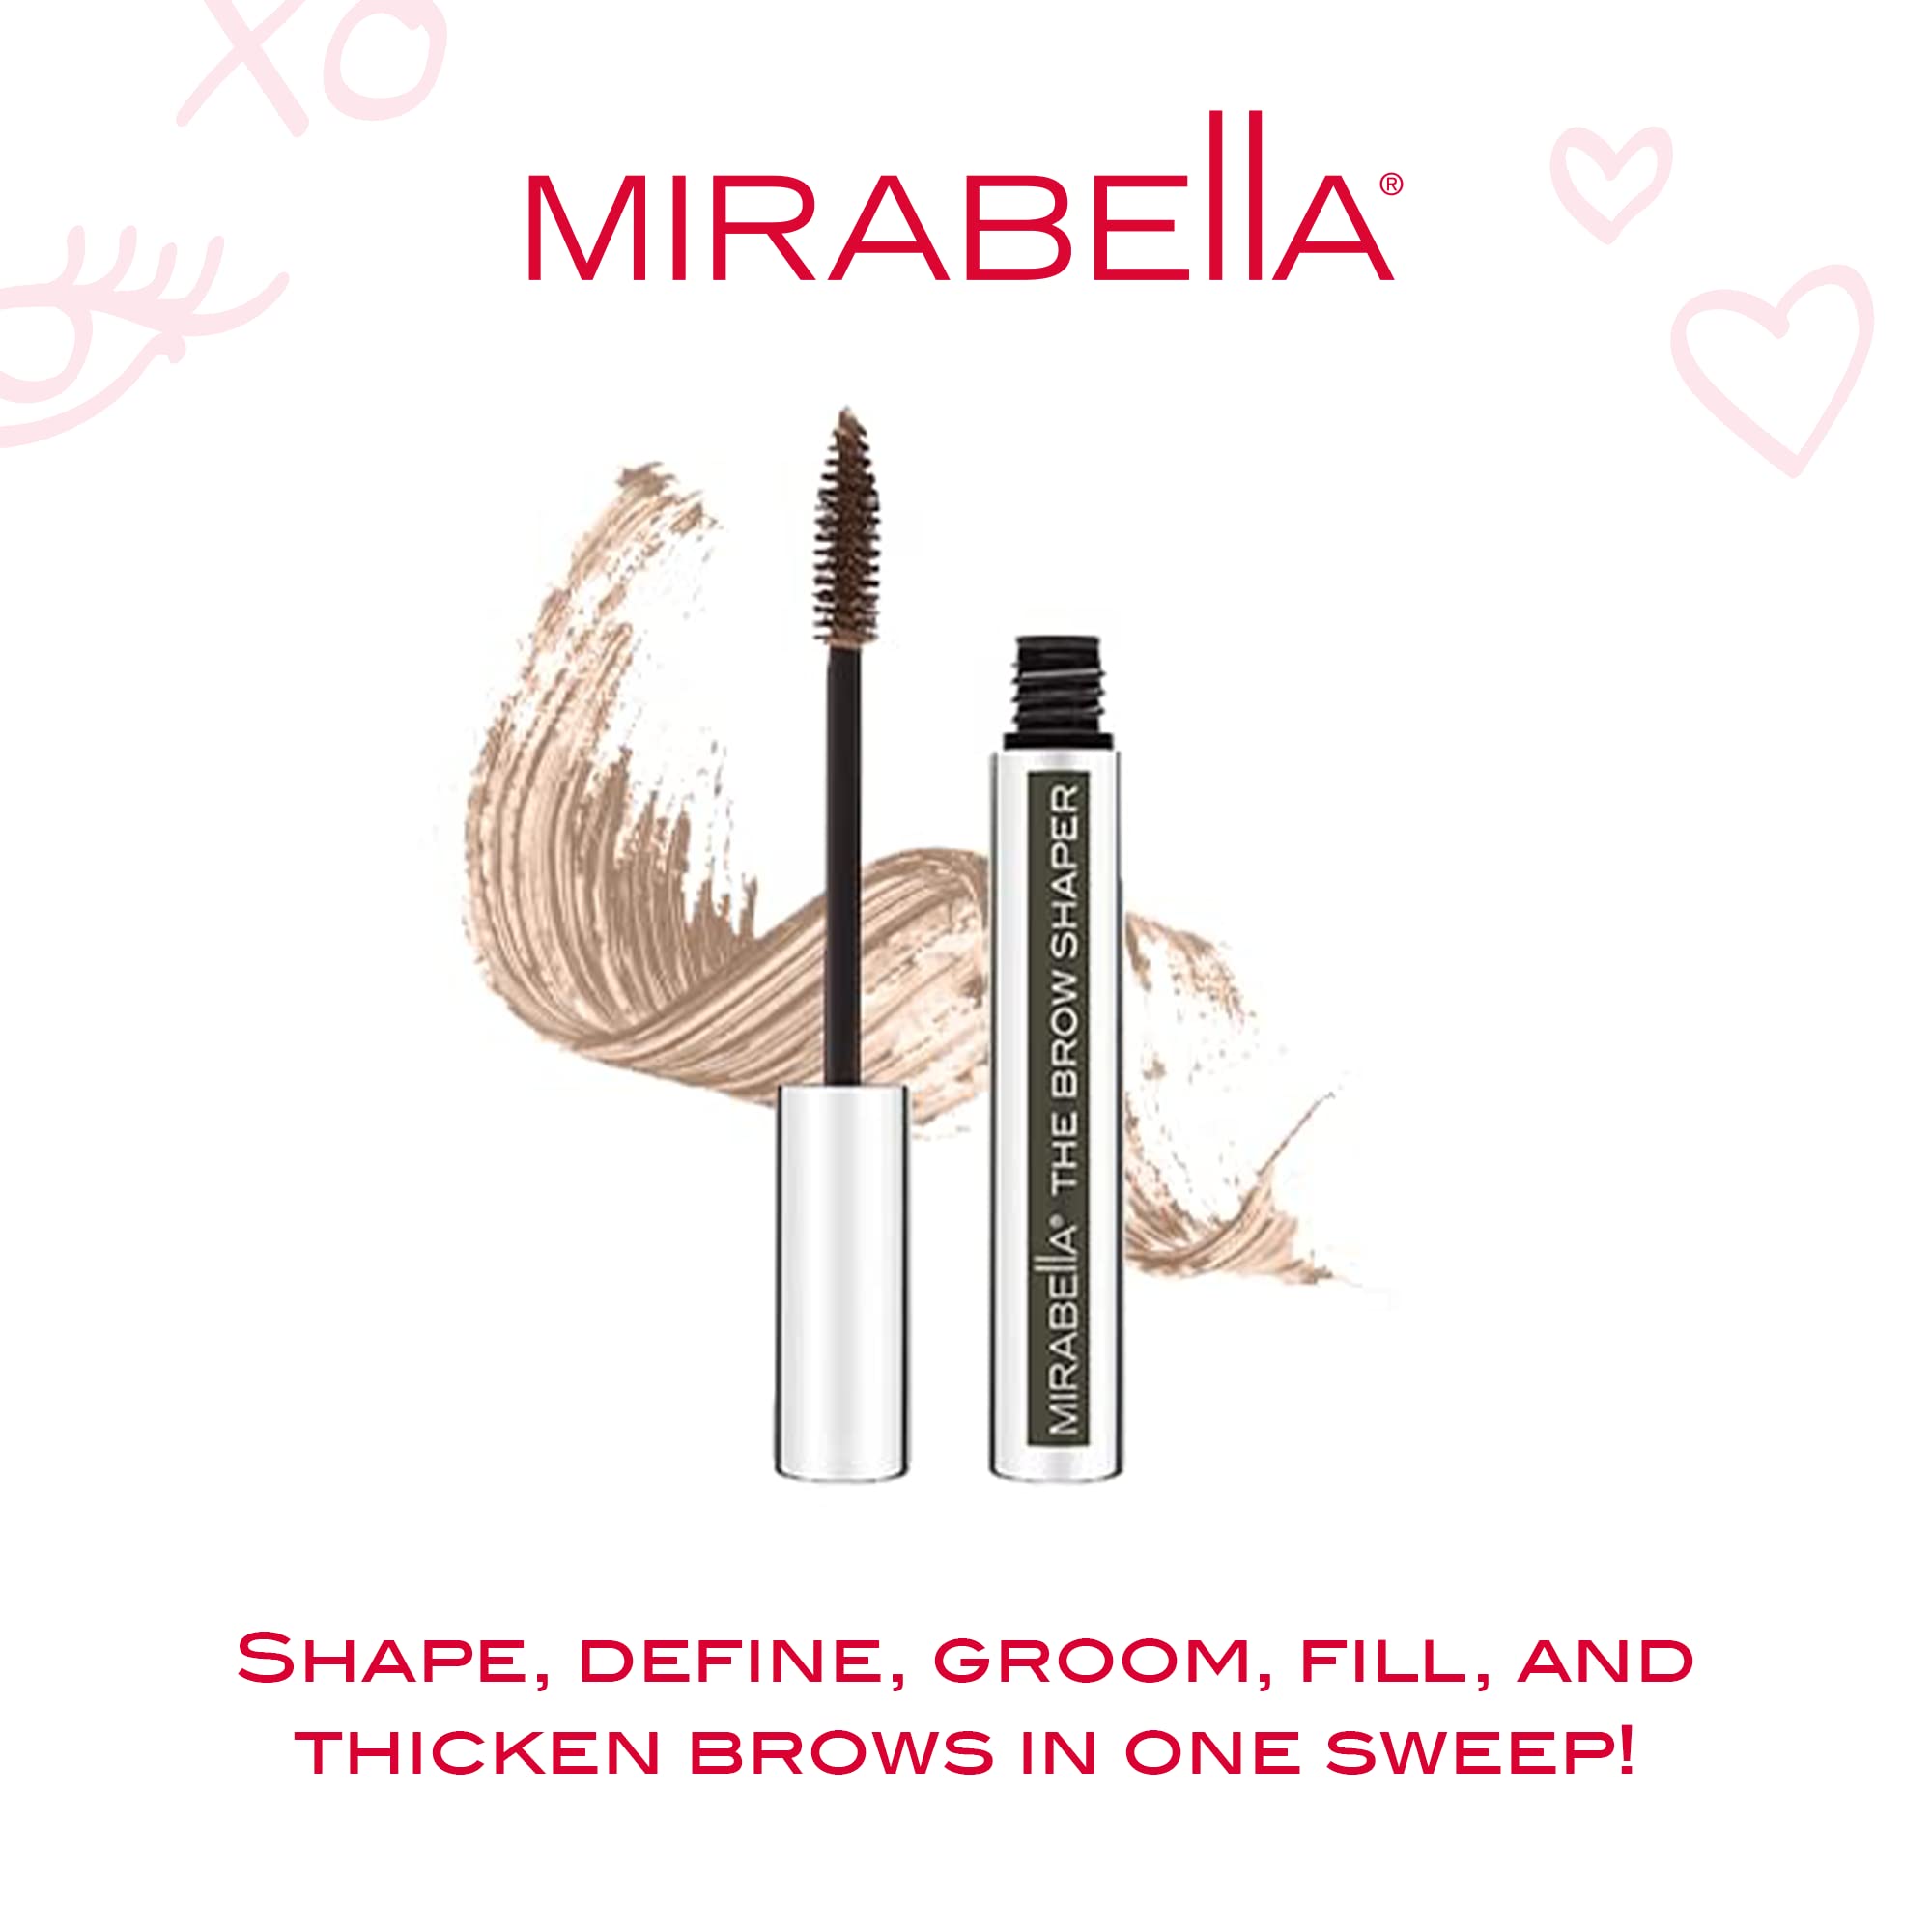 Mirabella Beauty Brow Shaper, Universal Shade - All-In-One Long-Lasting Eyebrow Gel Shapes, Defines, Grooms, Fills & Thickens Brows - Aloe & Vitamin B5 for Conditioning & Strengthening